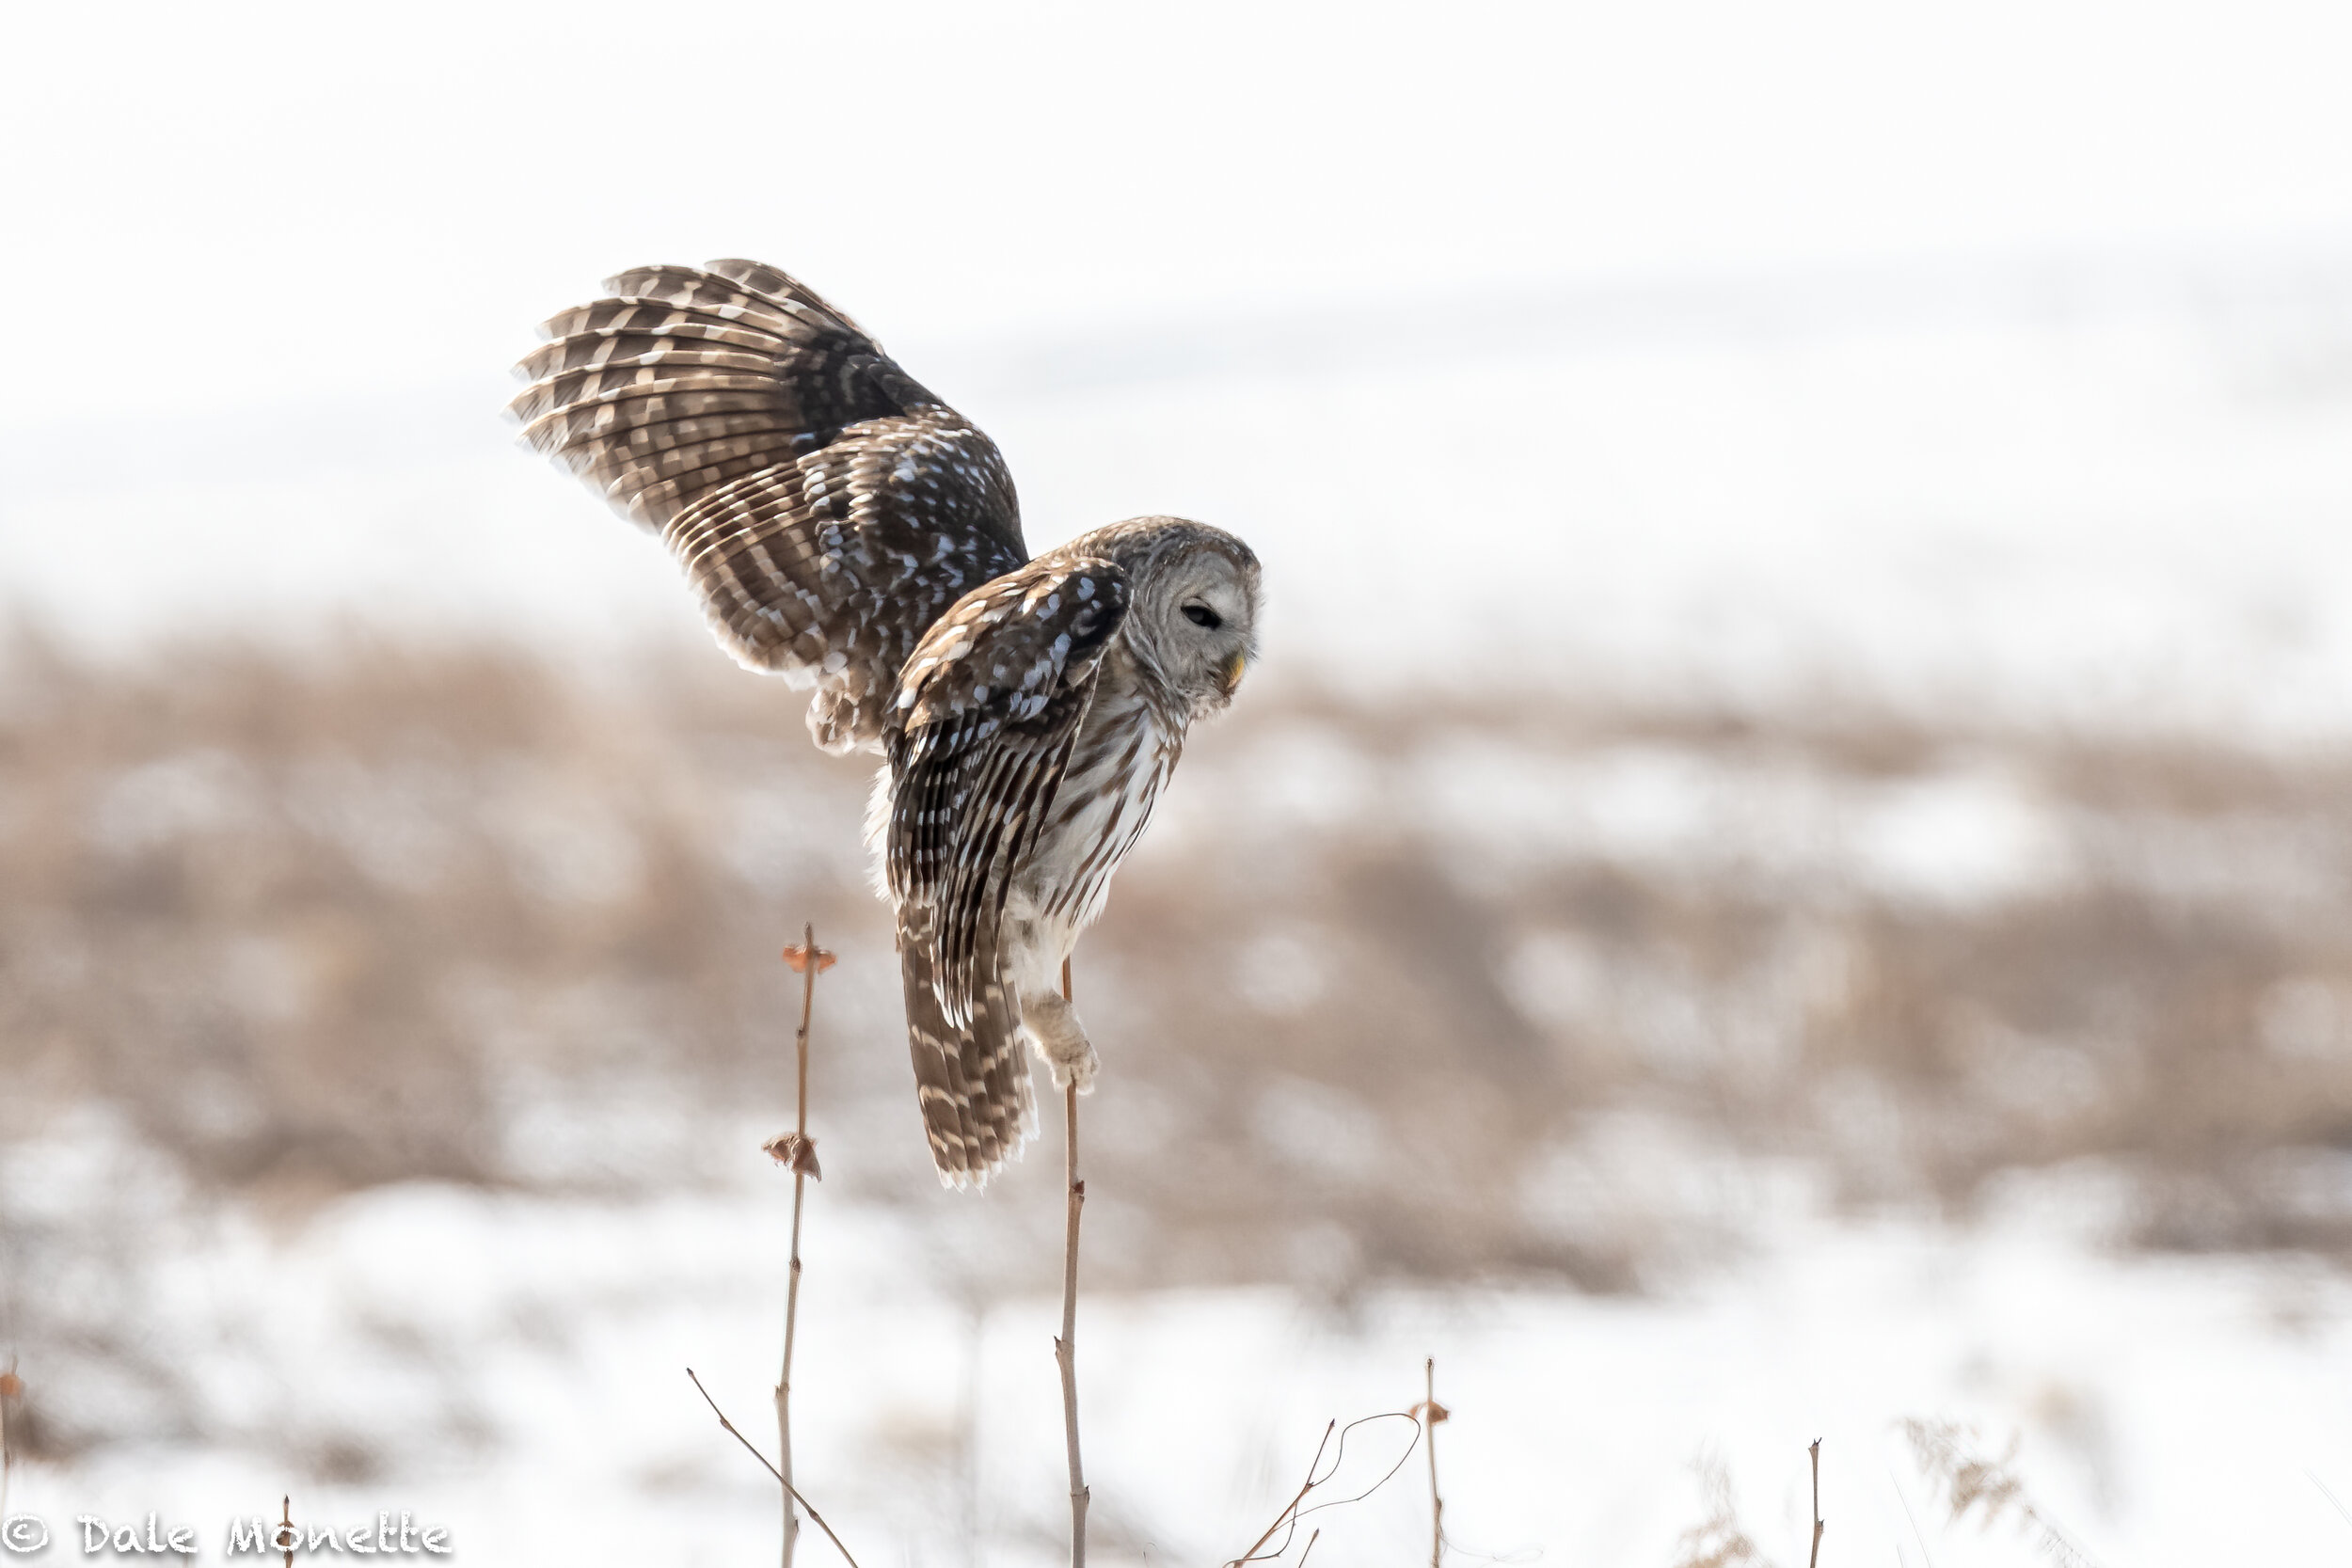   A photo of a barred owl from last year when they were everywhere. One of 2,000 I took but did not post.  